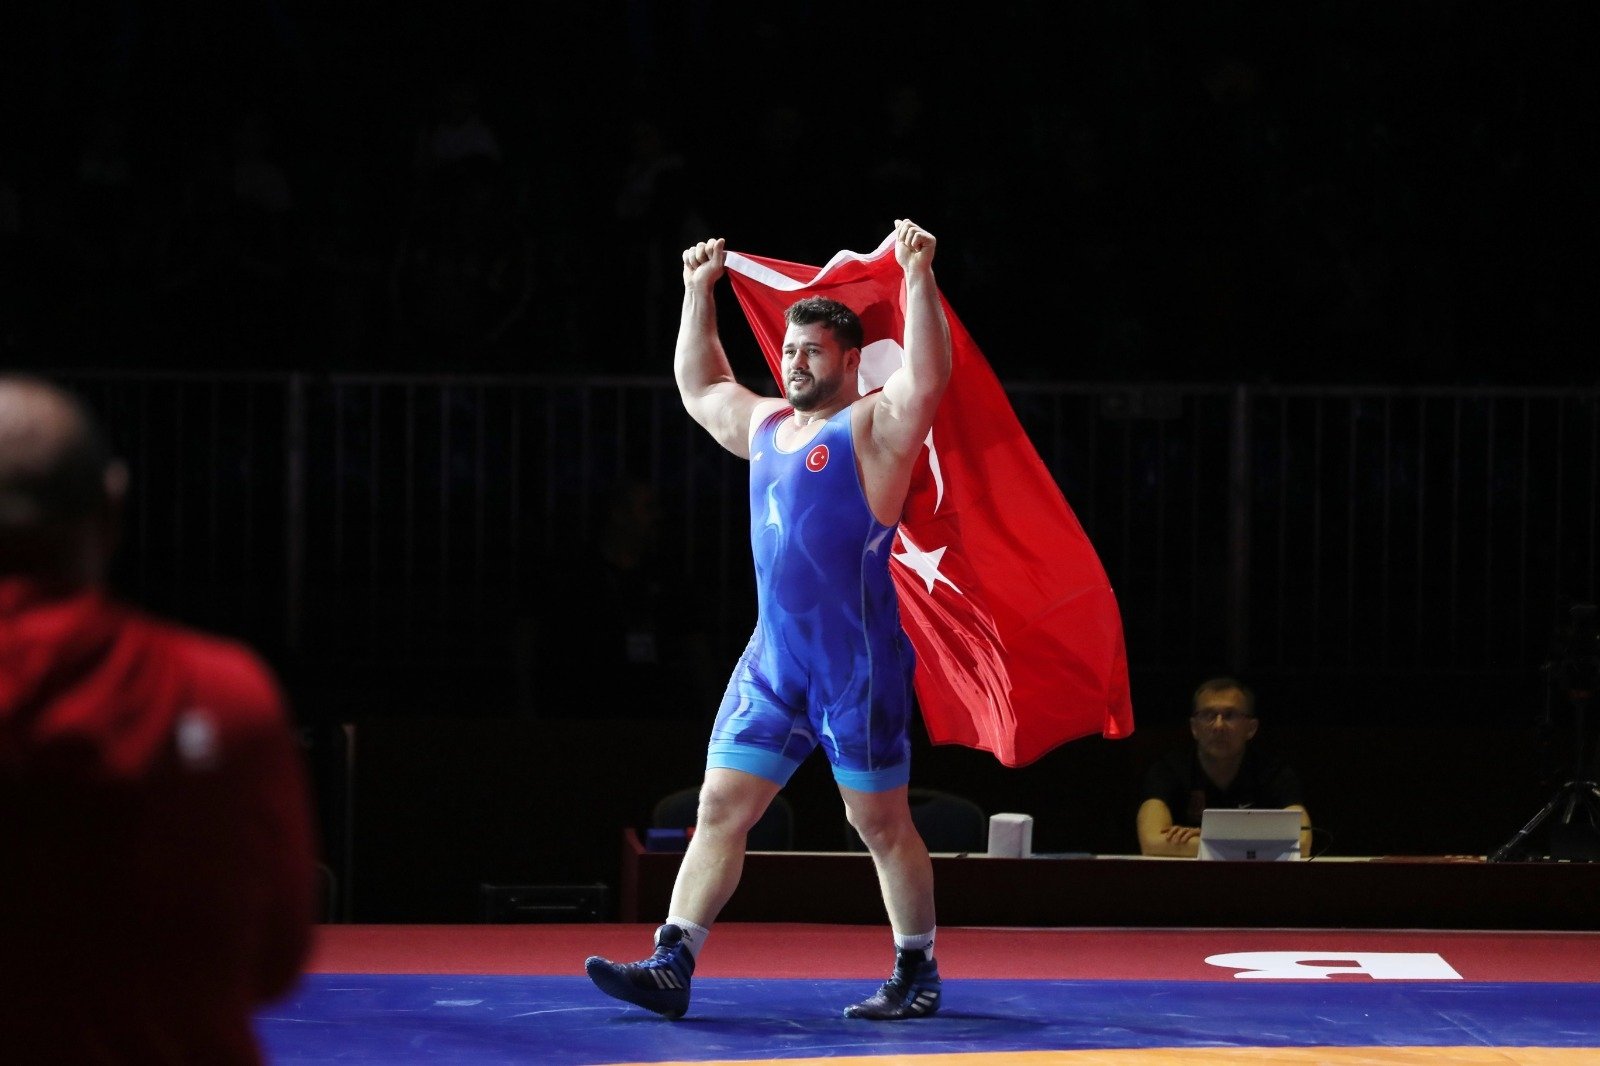 Turkish wrestler Rıza Kayaalp celebrates his 11th gold medal in the European Wrestling Championships in Budapest, Hungary, April 2, 2022. (DHA Photo)